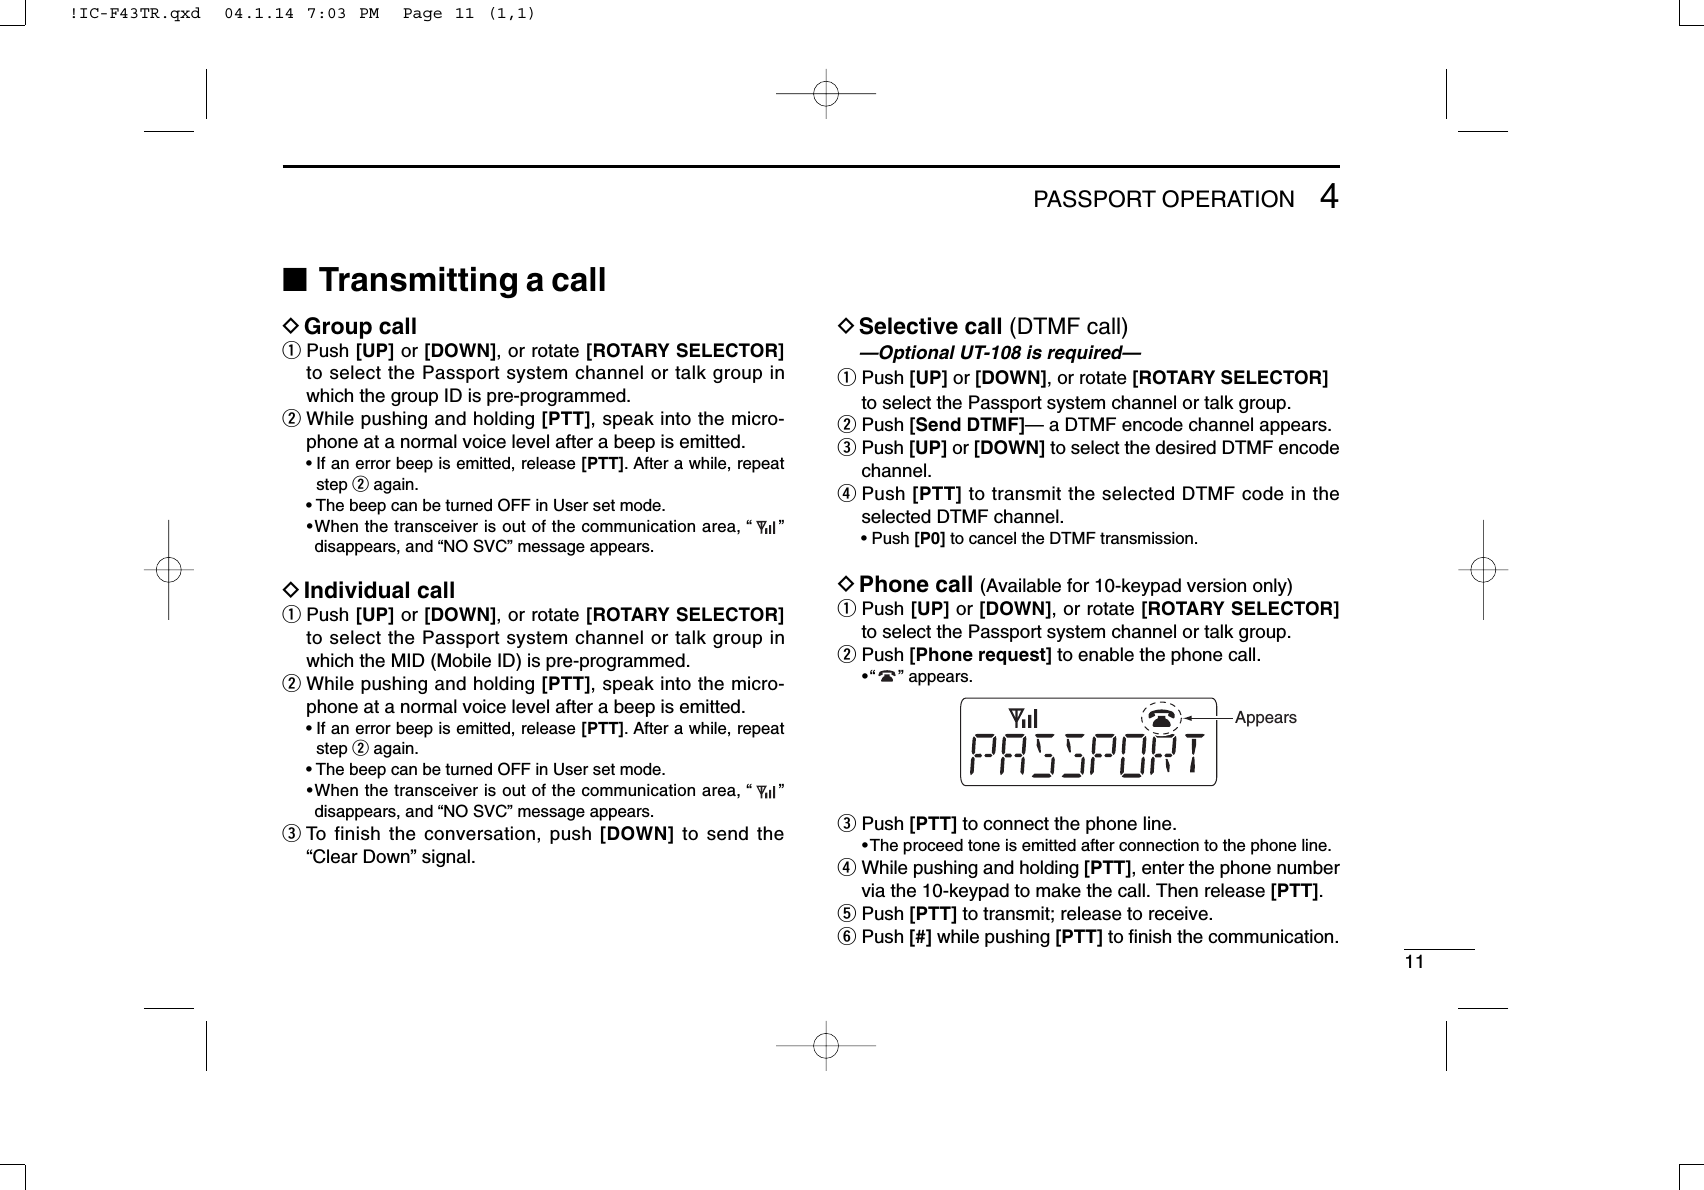 114PASSPORT OPERATION■Transmitting a callDGroup callqPush [UP] or [DOWN], or rotate [ROTARY SELECTOR]to select the Passport system channel or talk group inwhich the group ID is pre-programmed.wWhile pushing and holding [PTT], speak into the micro-phone at a normal voice level after a beep is emitted.• If an error beep is emitted, release [PTT]. After a while, repeatstep wagain.• The beep can be turned OFF in User set mode.•When the transceiver is out of the communication area, “”disappears, and “NO SVC” message appears.DIndividual callqPush [UP] or [DOWN], or rotate [ROTARY SELECTOR]to select the Passport system channel or talk group inwhich the MID (Mobile ID) is pre-programmed.wWhile pushing and holding [PTT], speak into the micro-phone at a normal voice level after a beep is emitted.• If an error beep is emitted, release [PTT]. After a while, repeatstep wagain.• The beep can be turned OFF in User set mode.•When the transceiver is out of the communication area, “”disappears, and “NO SVC” message appears.eTo finish the conversation, push [DOWN] to send the“Clear Down” signal.DSelective call (DTMF call)—Optional UT-108 is required—qPush [UP] or [DOWN], or rotate [ROTARY SELECTOR]to select the Passport system channel or talk group.wPush [Send DTMF]— a DTMF encode channel appears.ePush [UP] or [DOWN] to select the desired DTMF encodechannel.rPush [PTT] to transmit the selected DTMF code in theselected DTMF channel.• Push [P0] to cancel the DTMF transmission.DPhone call (Available for 10-keypad version only)qPush [UP] or [DOWN], or rotate [ROTARY SELECTOR]to select the Passport system channel or talk group.wPush [Phone request] to enable the phone call.•“ ” appears.ePush [PTT] to connect the phone line.•The proceed tone is emitted after connection to the phone line.rWhile pushing and holding [PTT], enter the phone numbervia the 10-keypad to make the call. Then release [PTT].tPush [PTT] to transmit; release to receive.yPush [#] while pushing [PTT] to ﬁnish the communication.Appears!IC-F43TR.qxd  04.1.14 7:03 PM  Page 11 (1,1)